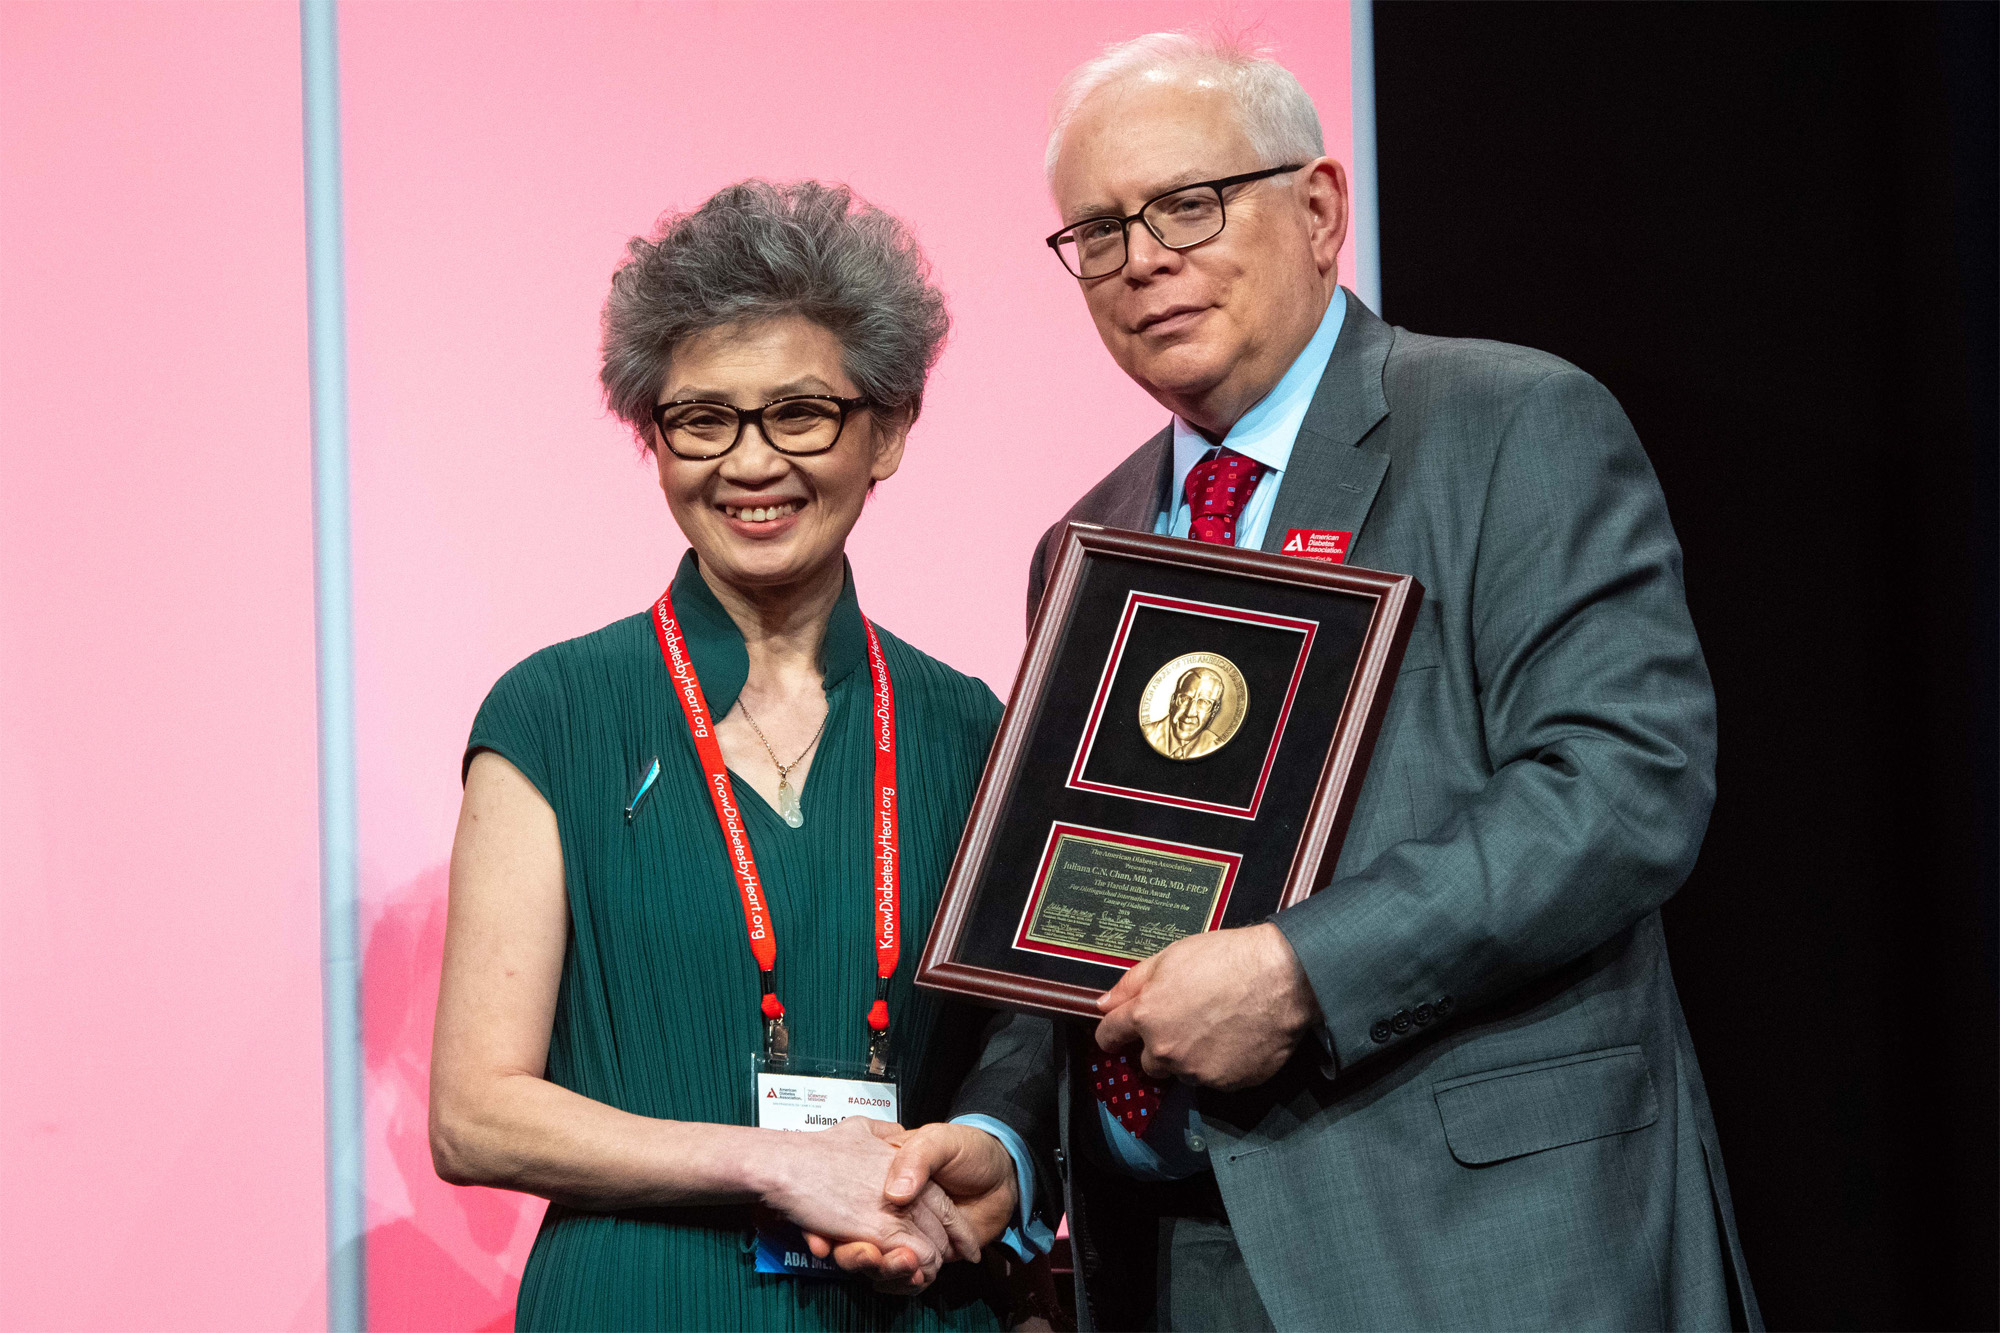 The award honours Professor Chan’s outstanding performance in research, evaluation and care in the field of diabetes from a global perspective and with an international impact.